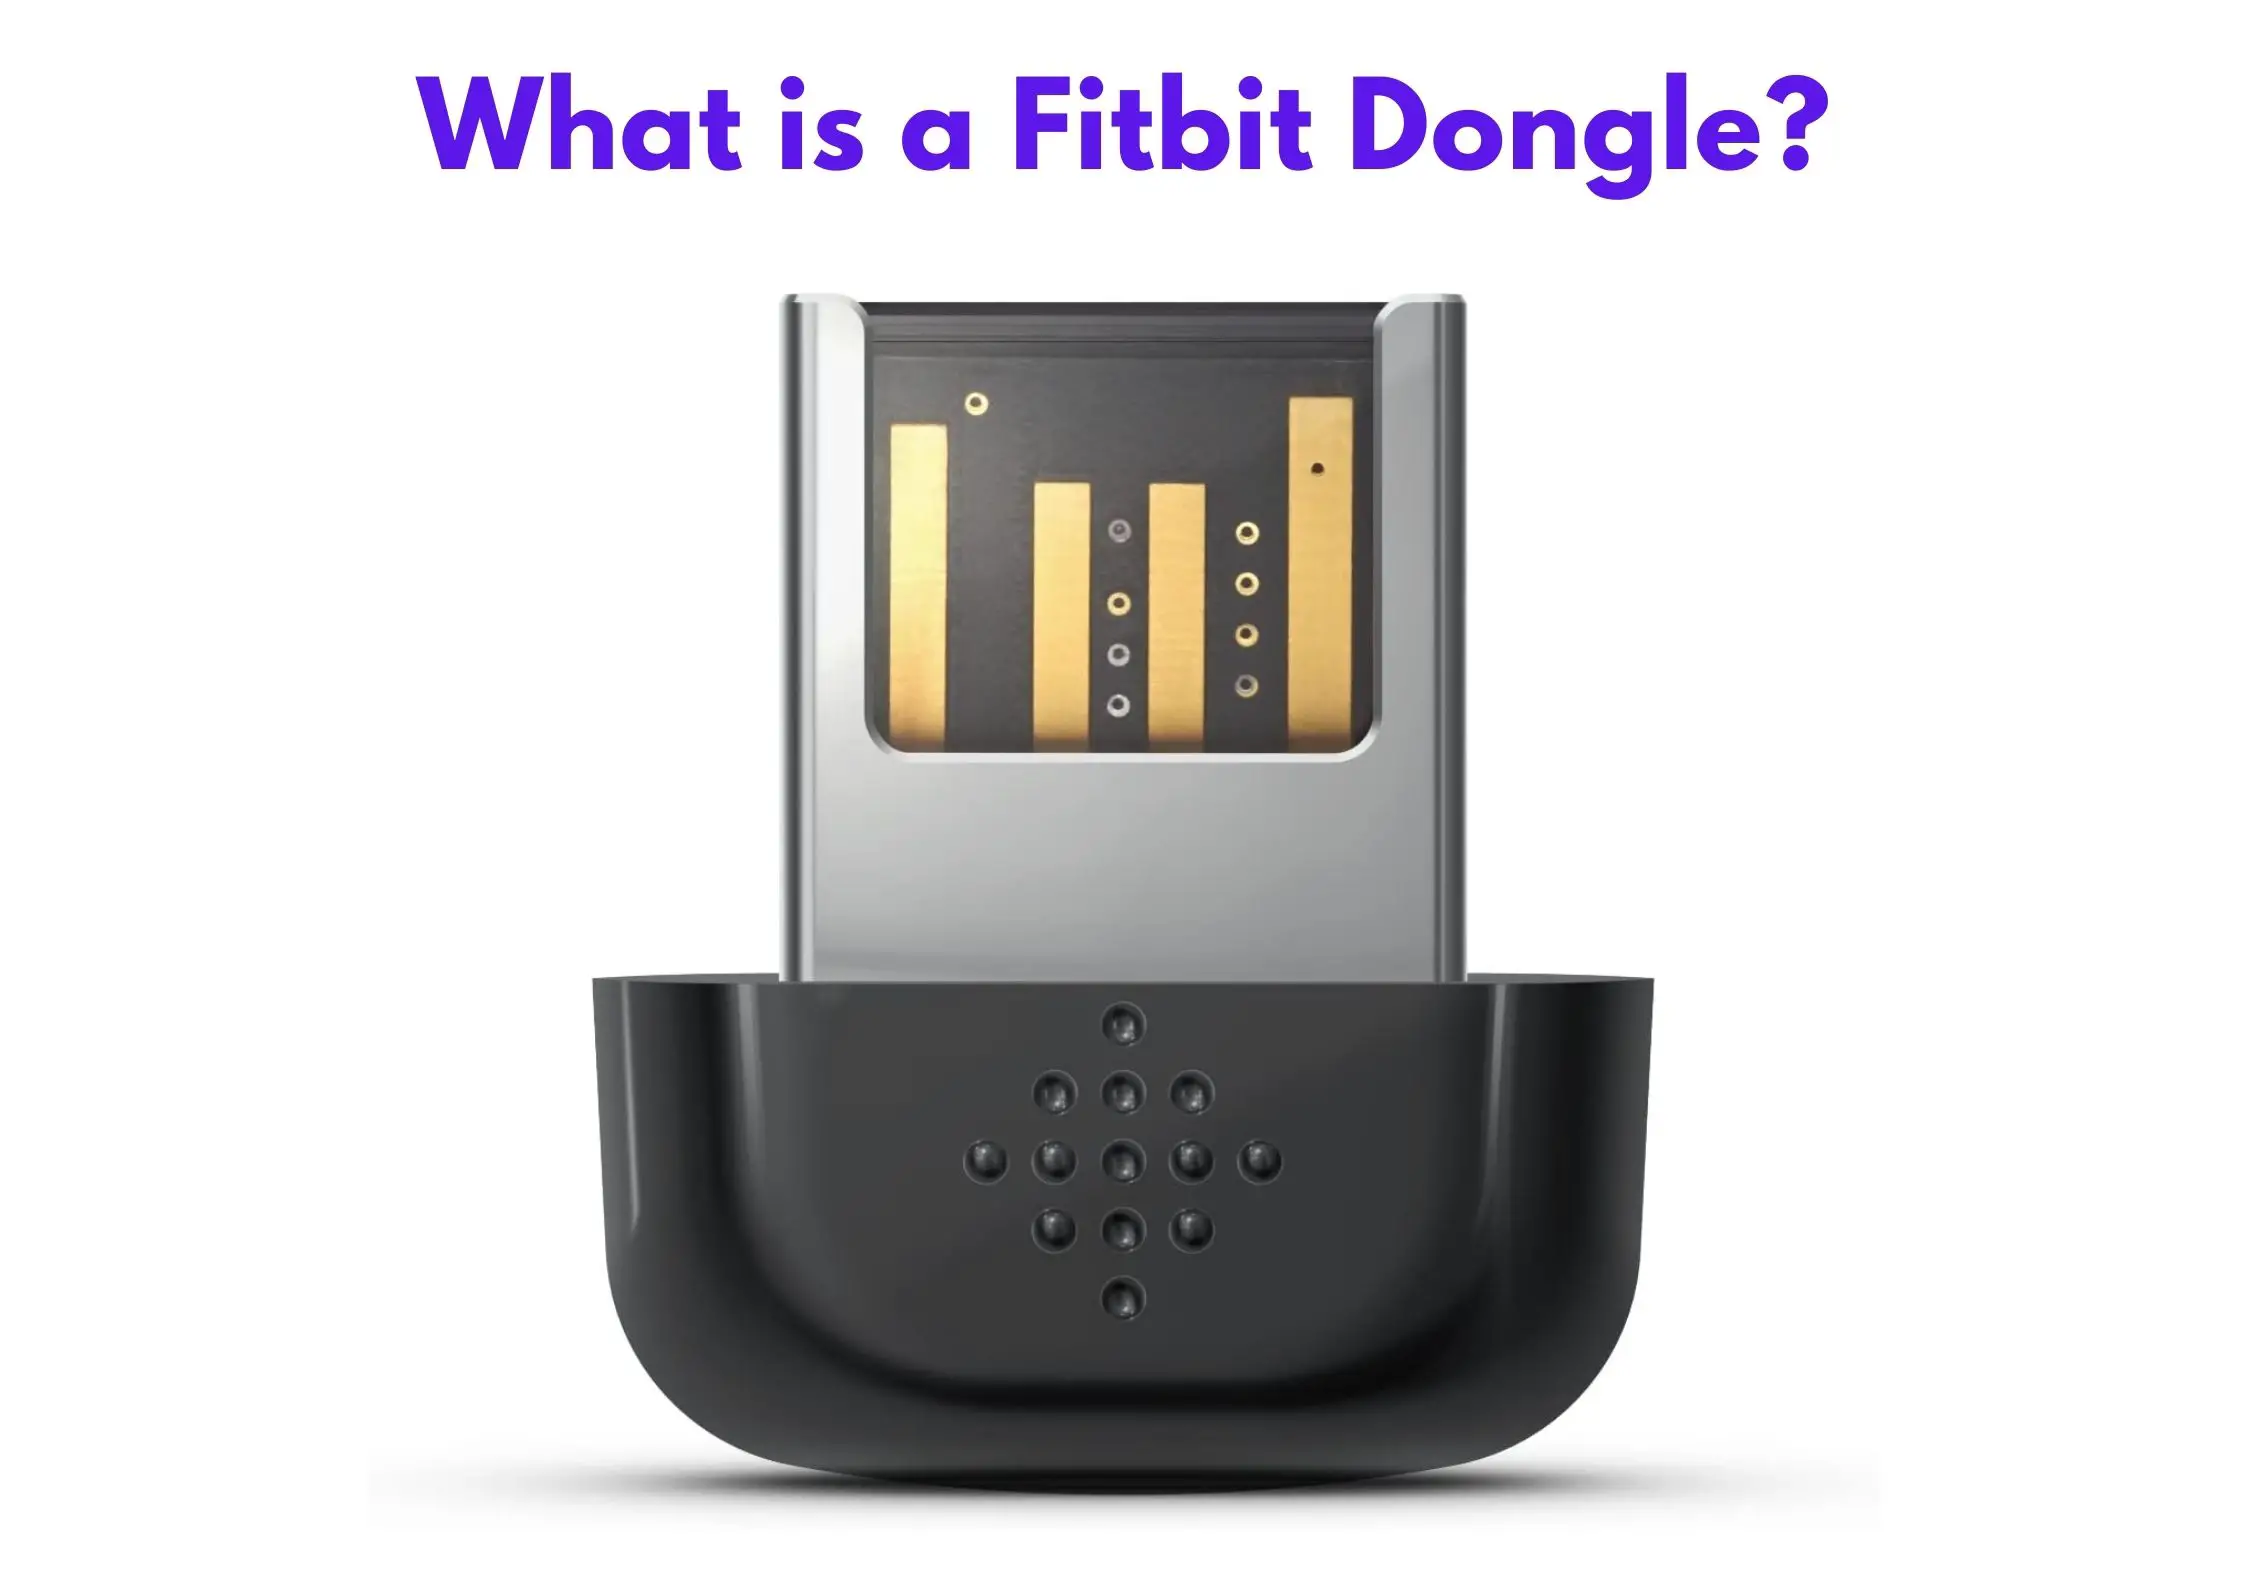 What is a Fitbit Dongle?